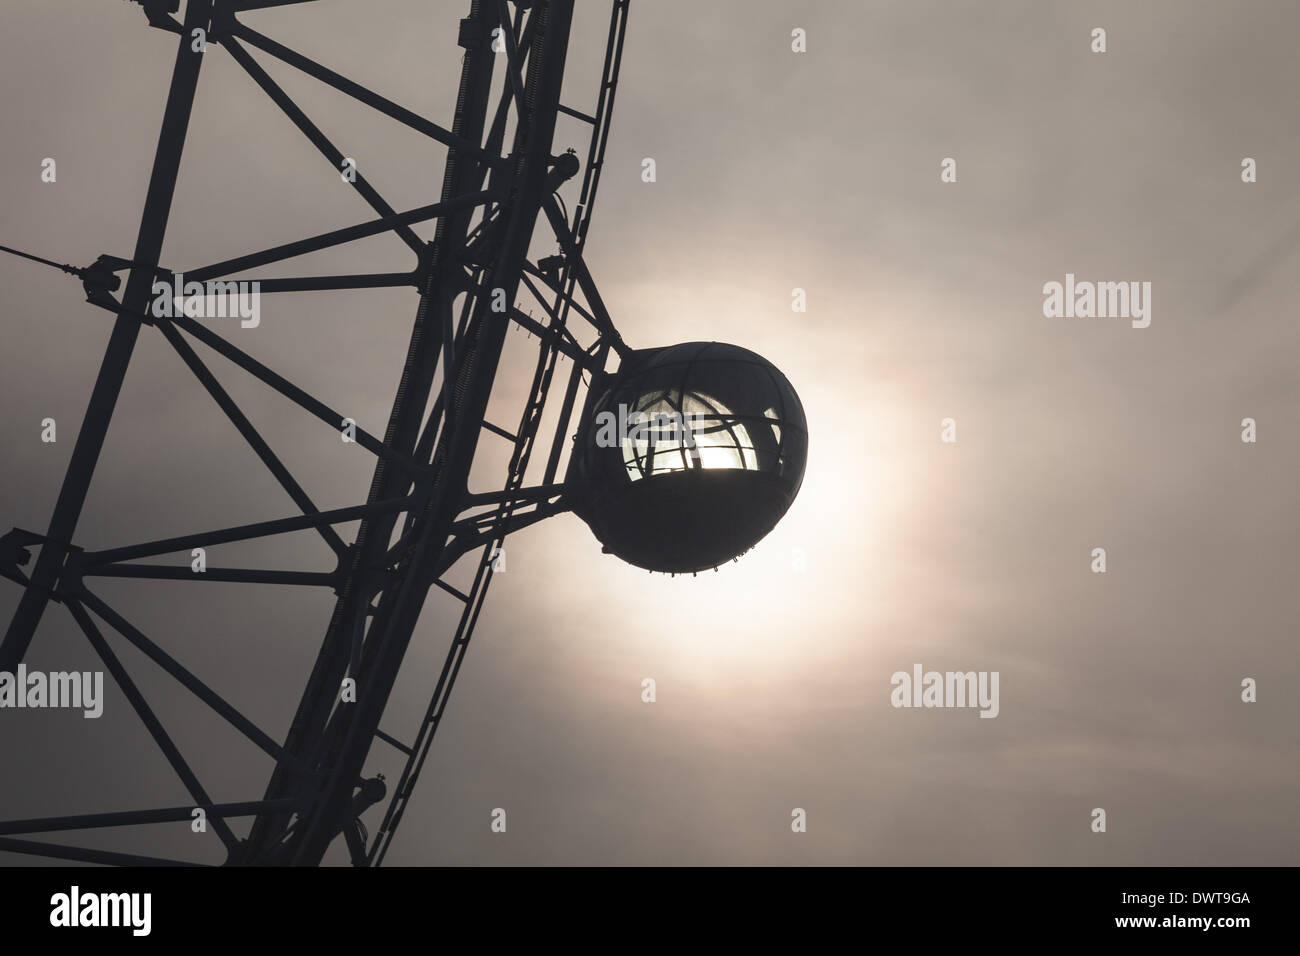 LONDON, UK, 13th Mar, 2014. London starts the day swathed in a blanket of fog. The rising sun is directly illuminating one of the pods on the London Eye. Credit:  Steve Bright/Alamy Live News Stock Photo